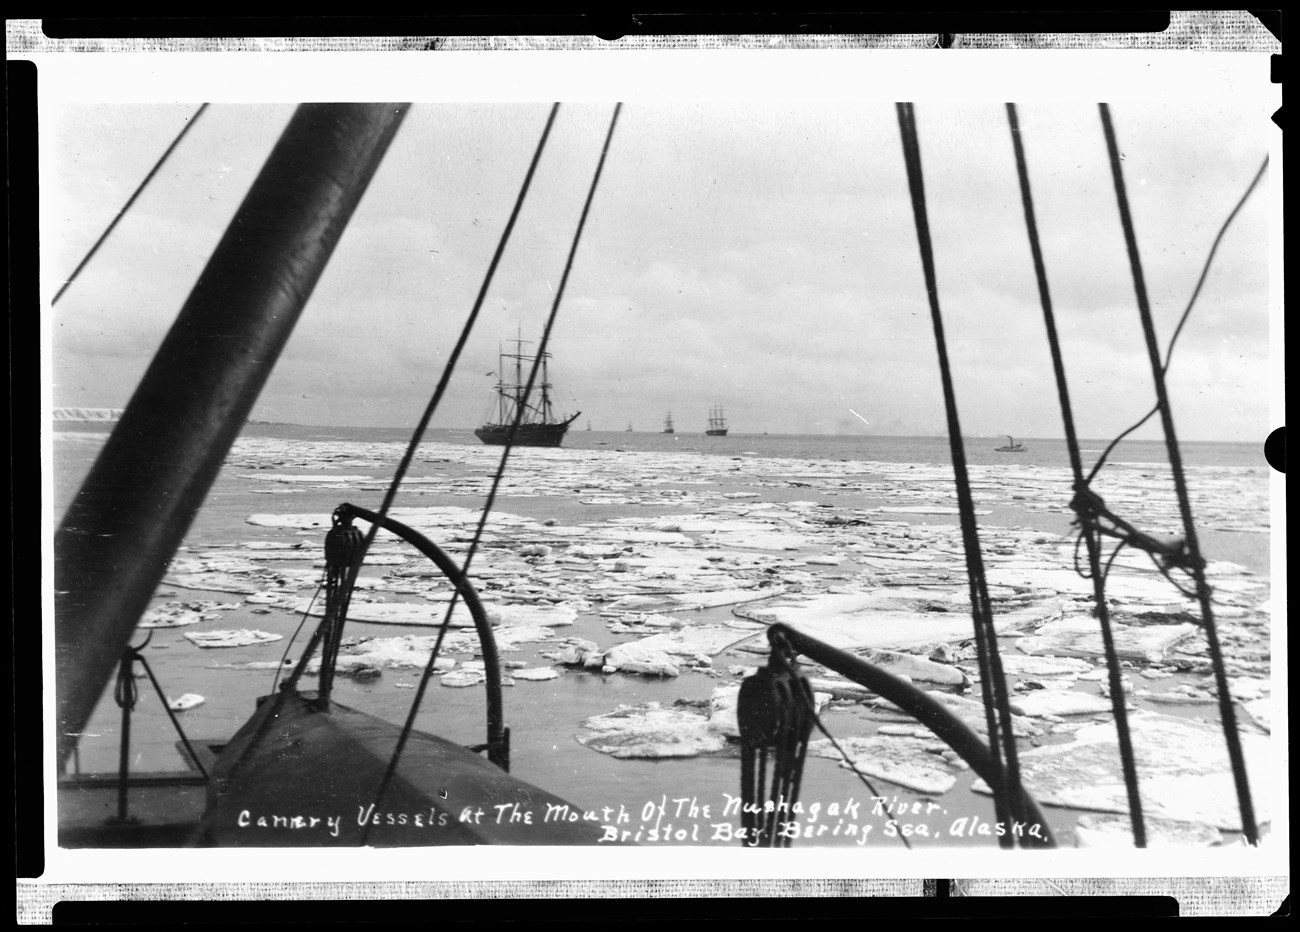 Ships with tall masts sail between chunks of ice floating on the surface of water, black and white photo